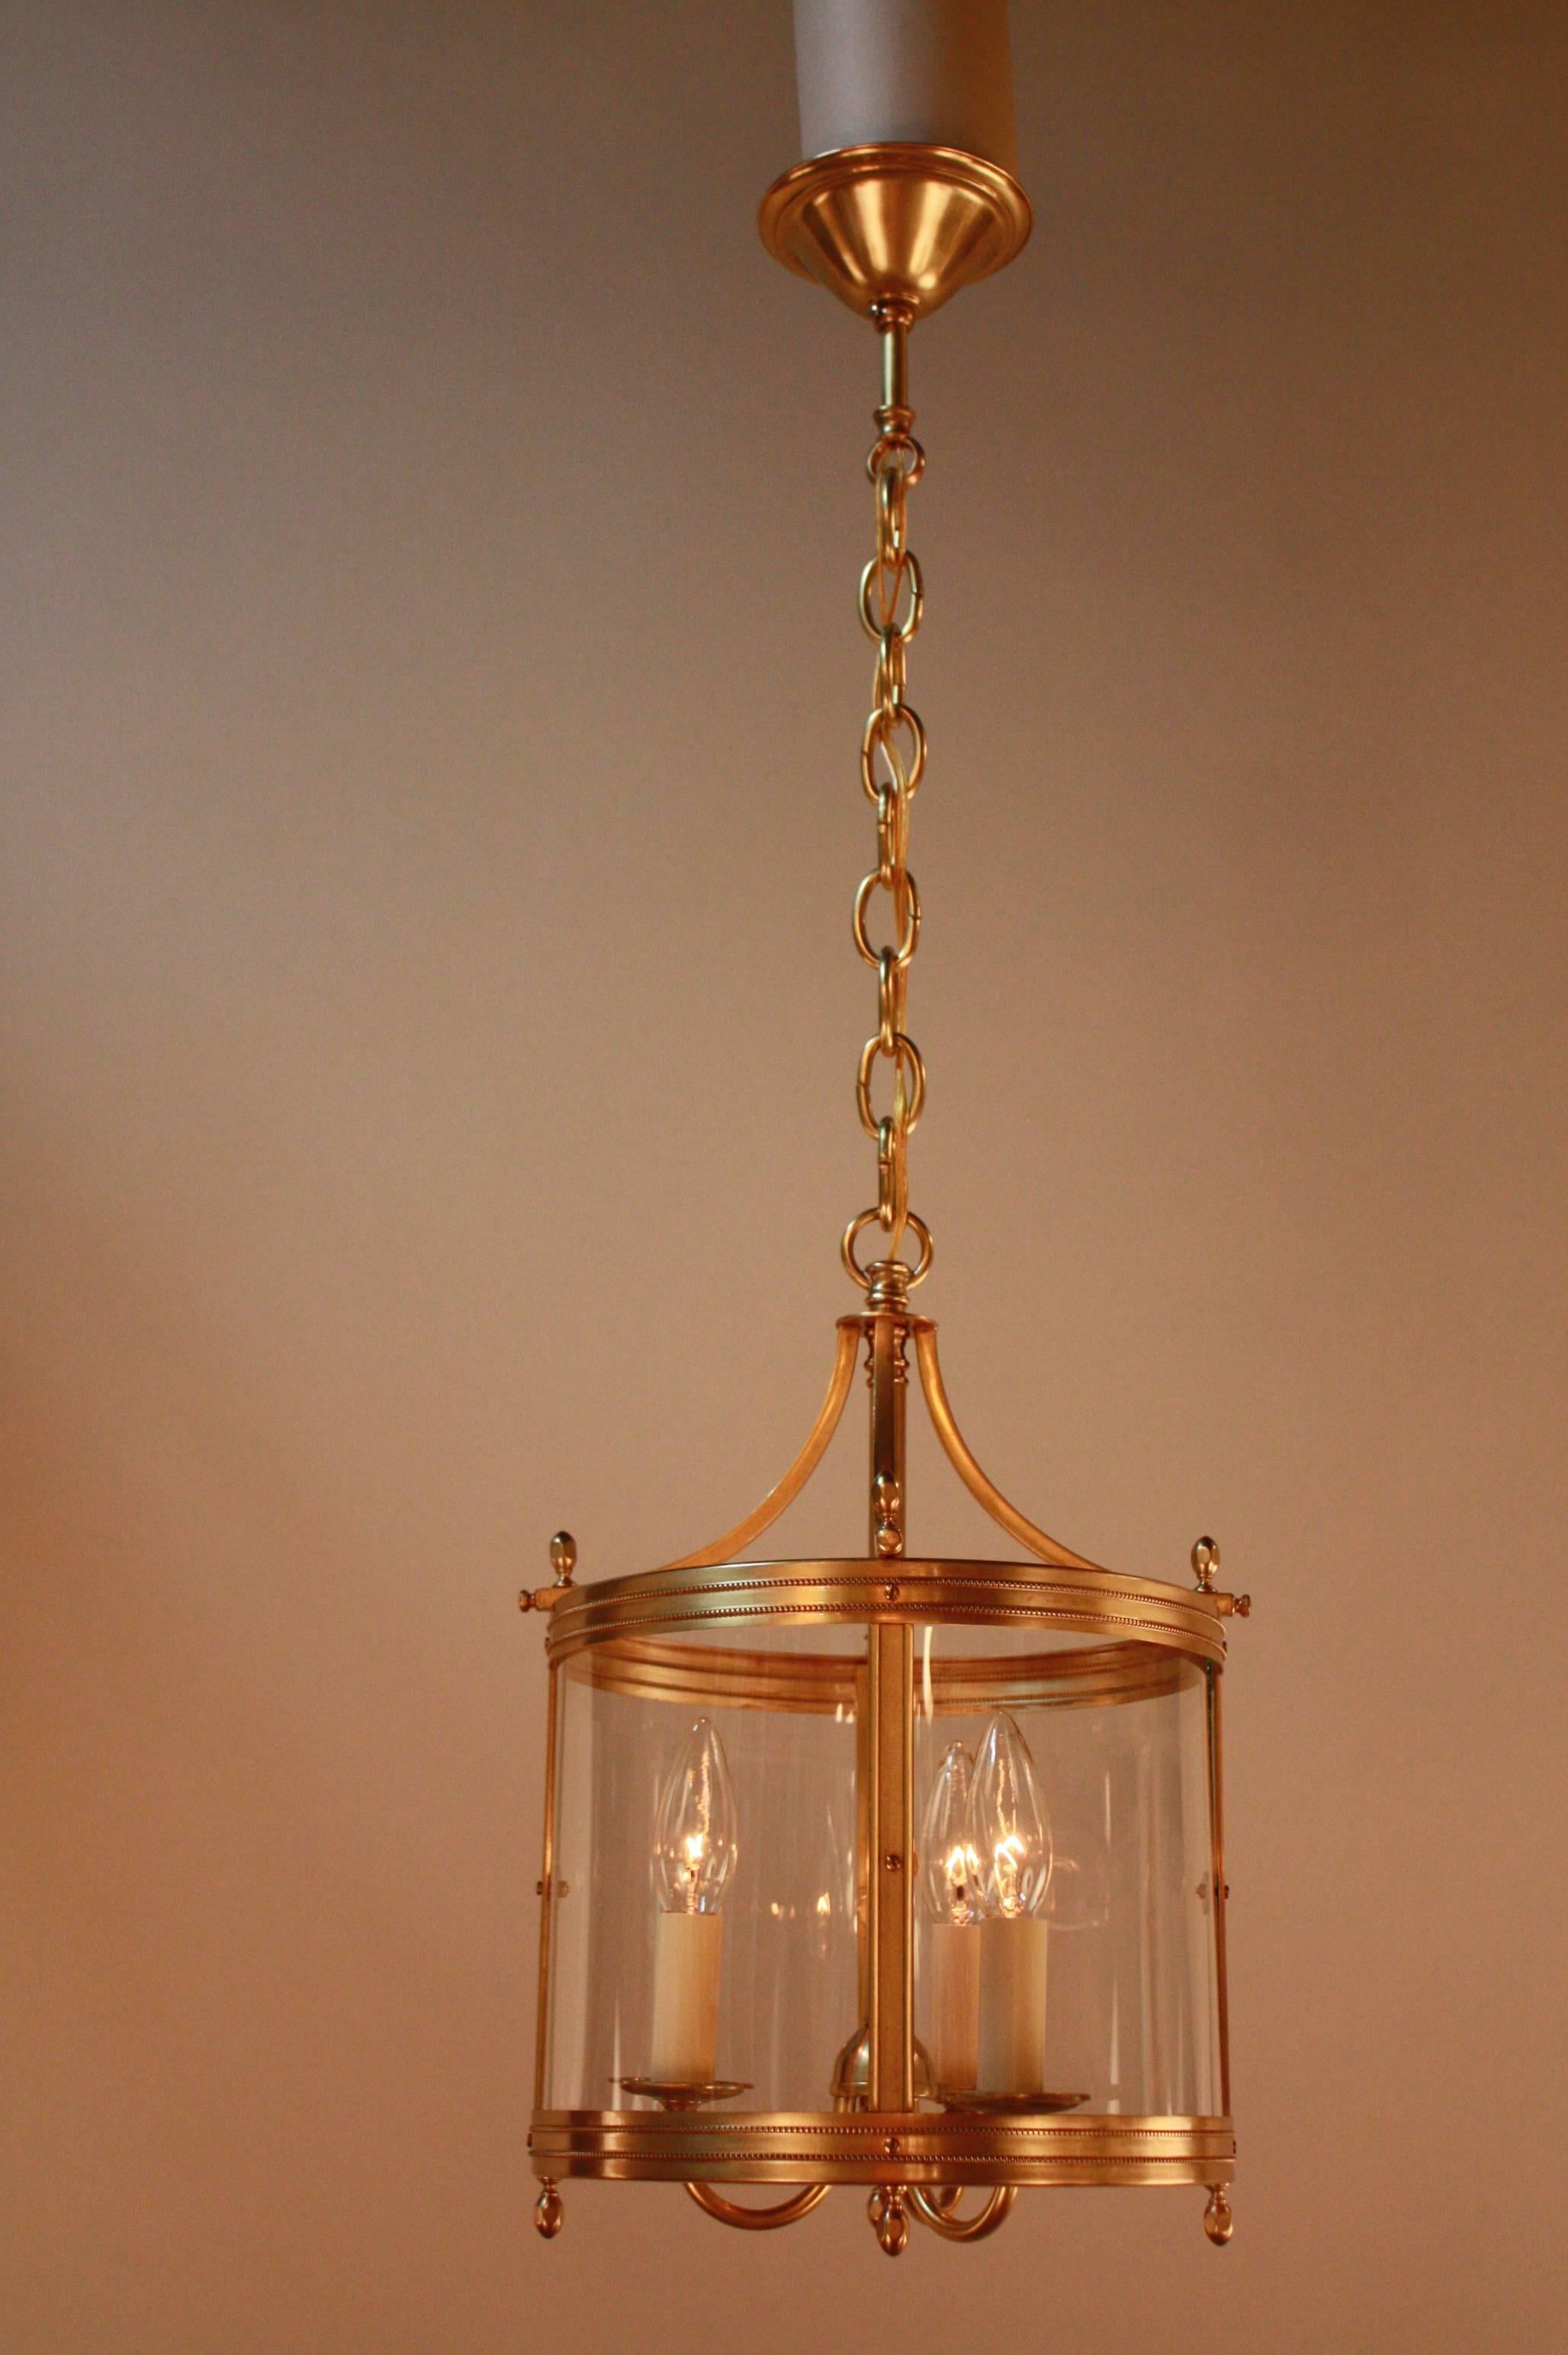 Maison Charles, known for beautiful bronze lighting, brings the traditional lantern a new life. Dating from the 1930's, this piece features new wiring and i sure to bring a unique chic feel to your space. 